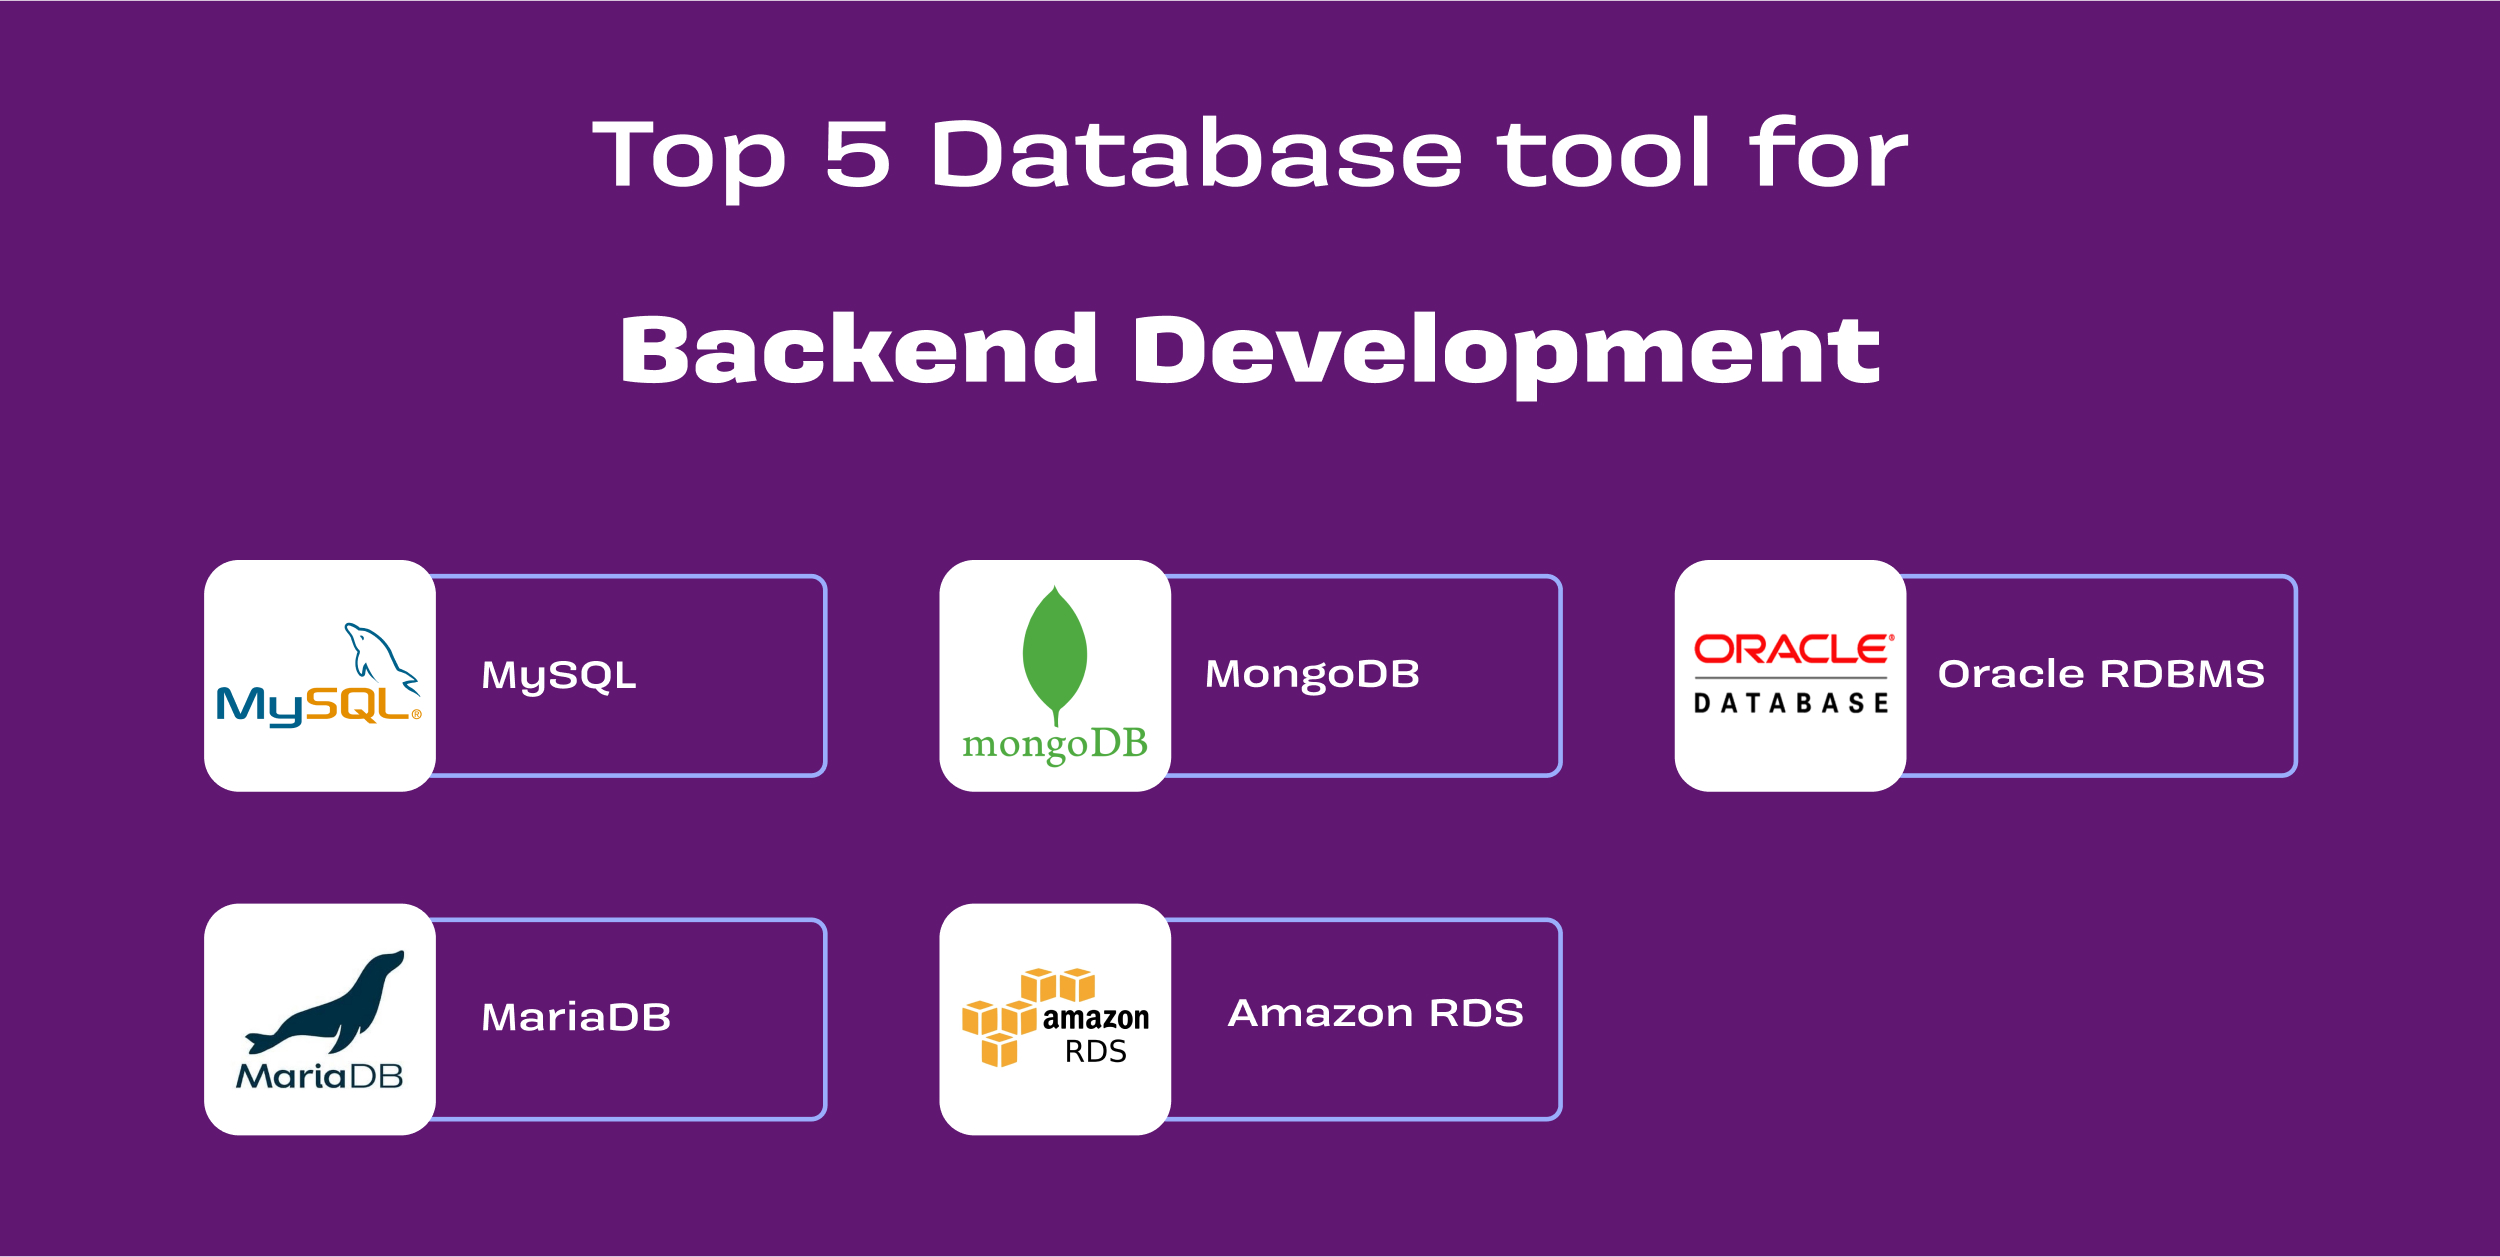 Top 5 Database tool for Backend Development